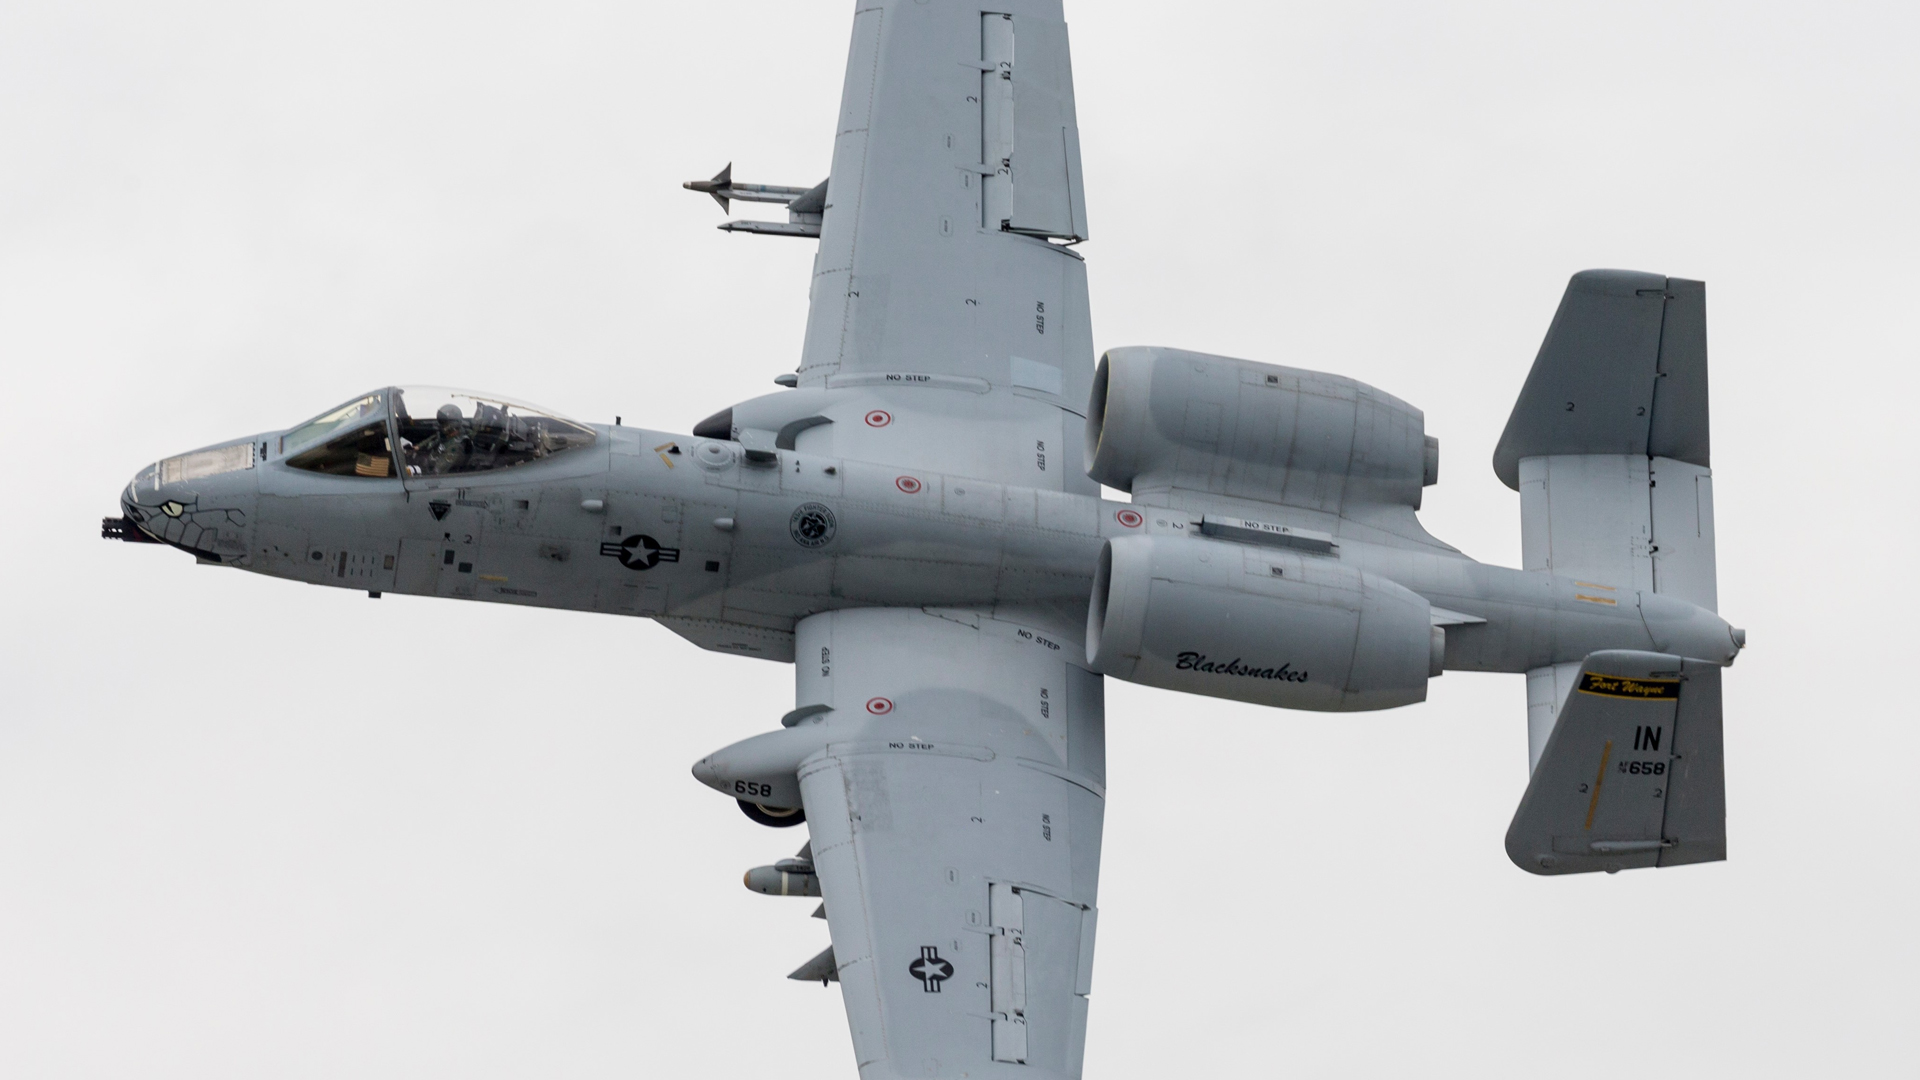 Kaman Receives Boeing Award for the A-10 Re-Wing Program